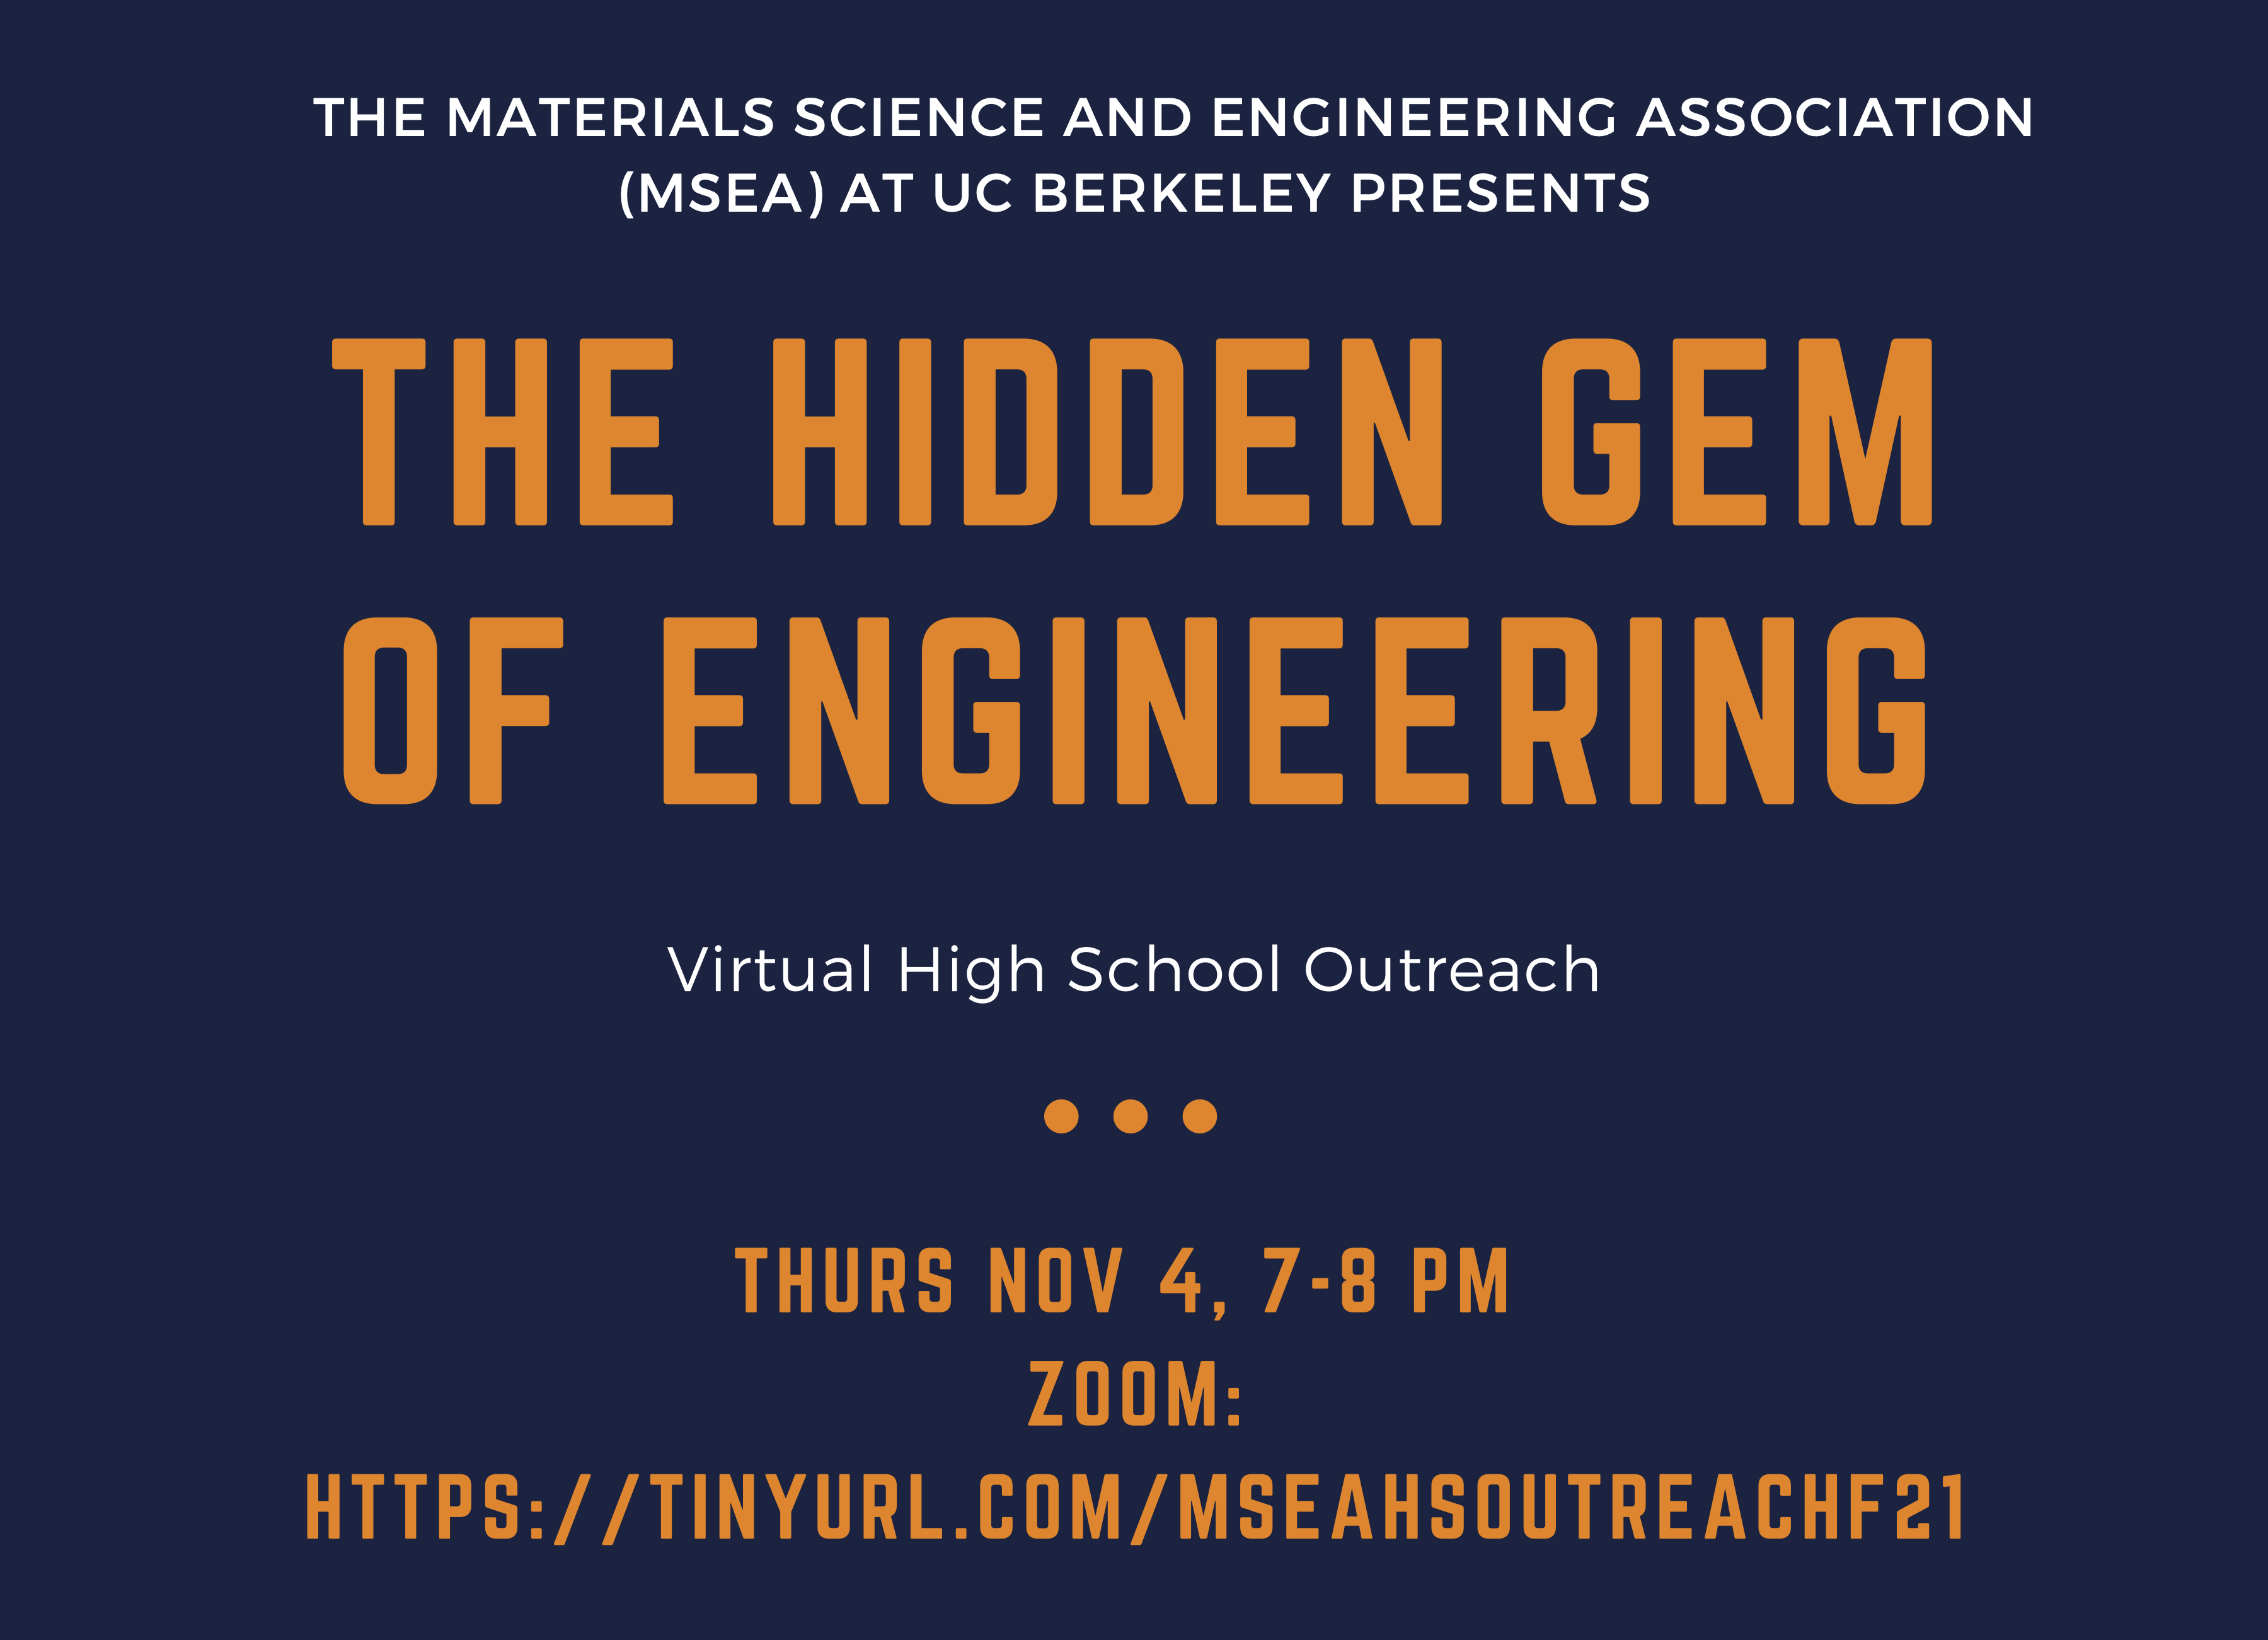 Event for high school students to learn about Materials Science and Engineering on November 4, 2021